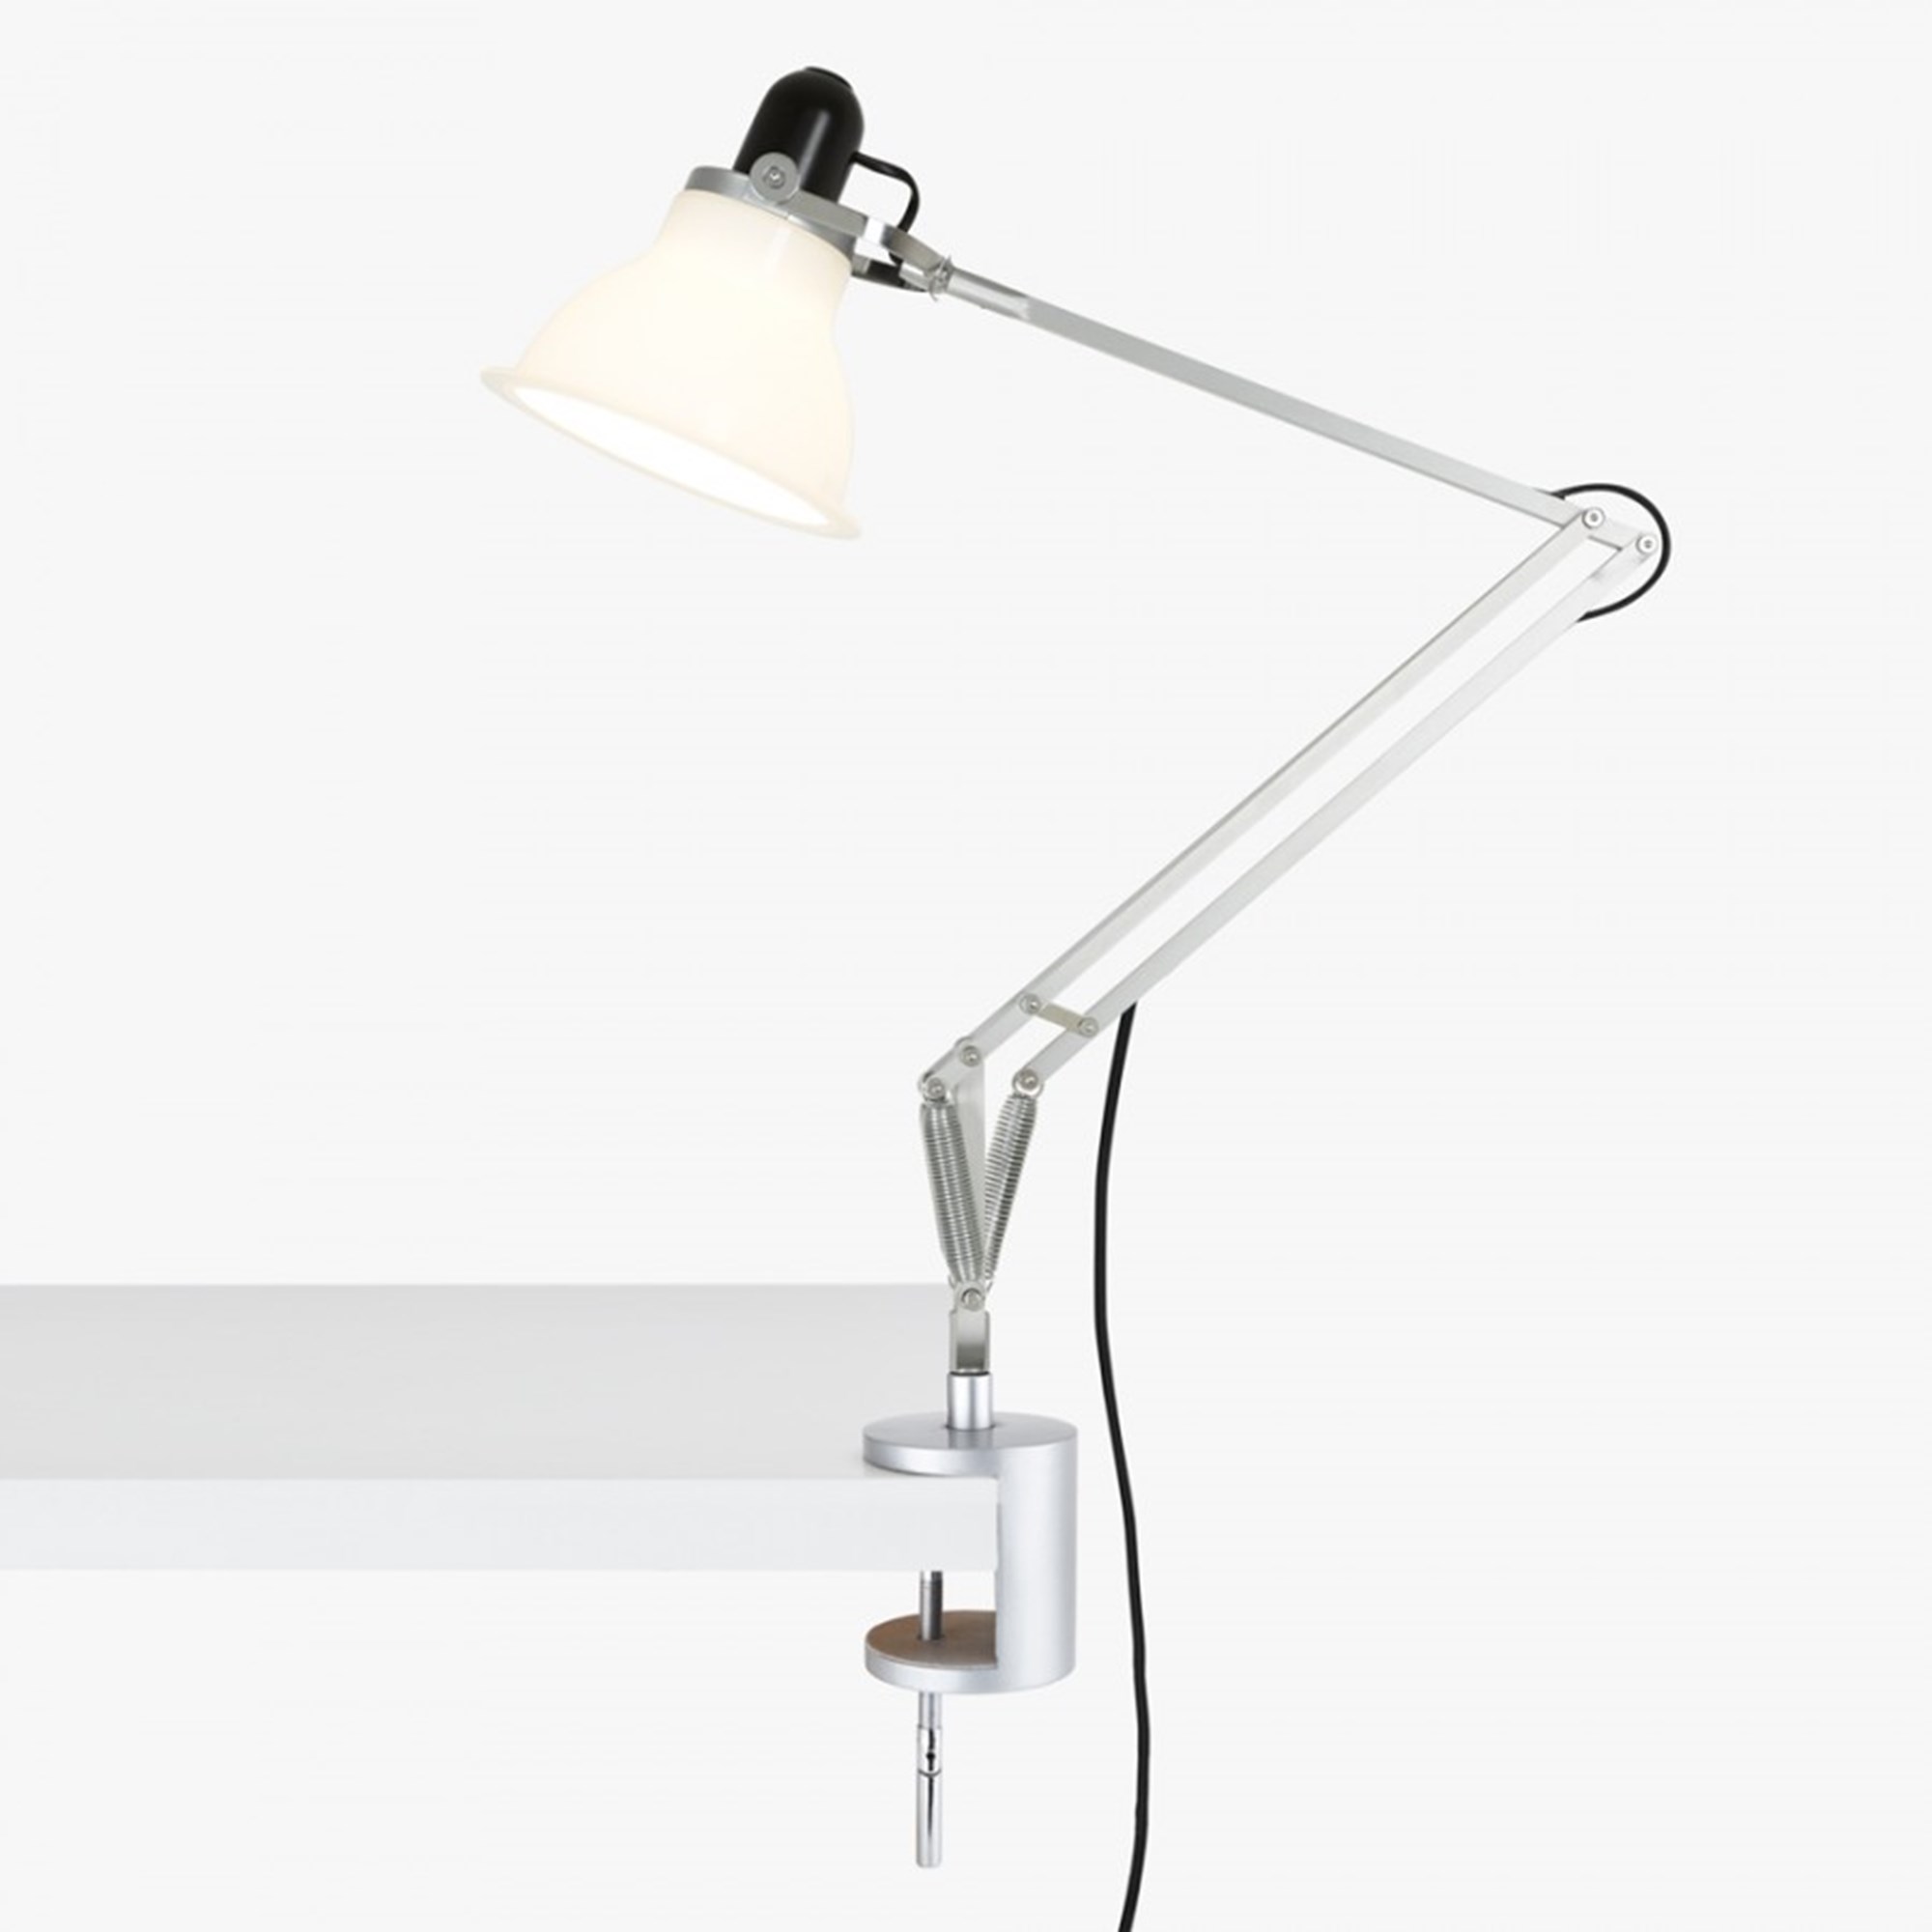 Anglepoise Type 1228 Adjustable Lamp With Desk Clamp